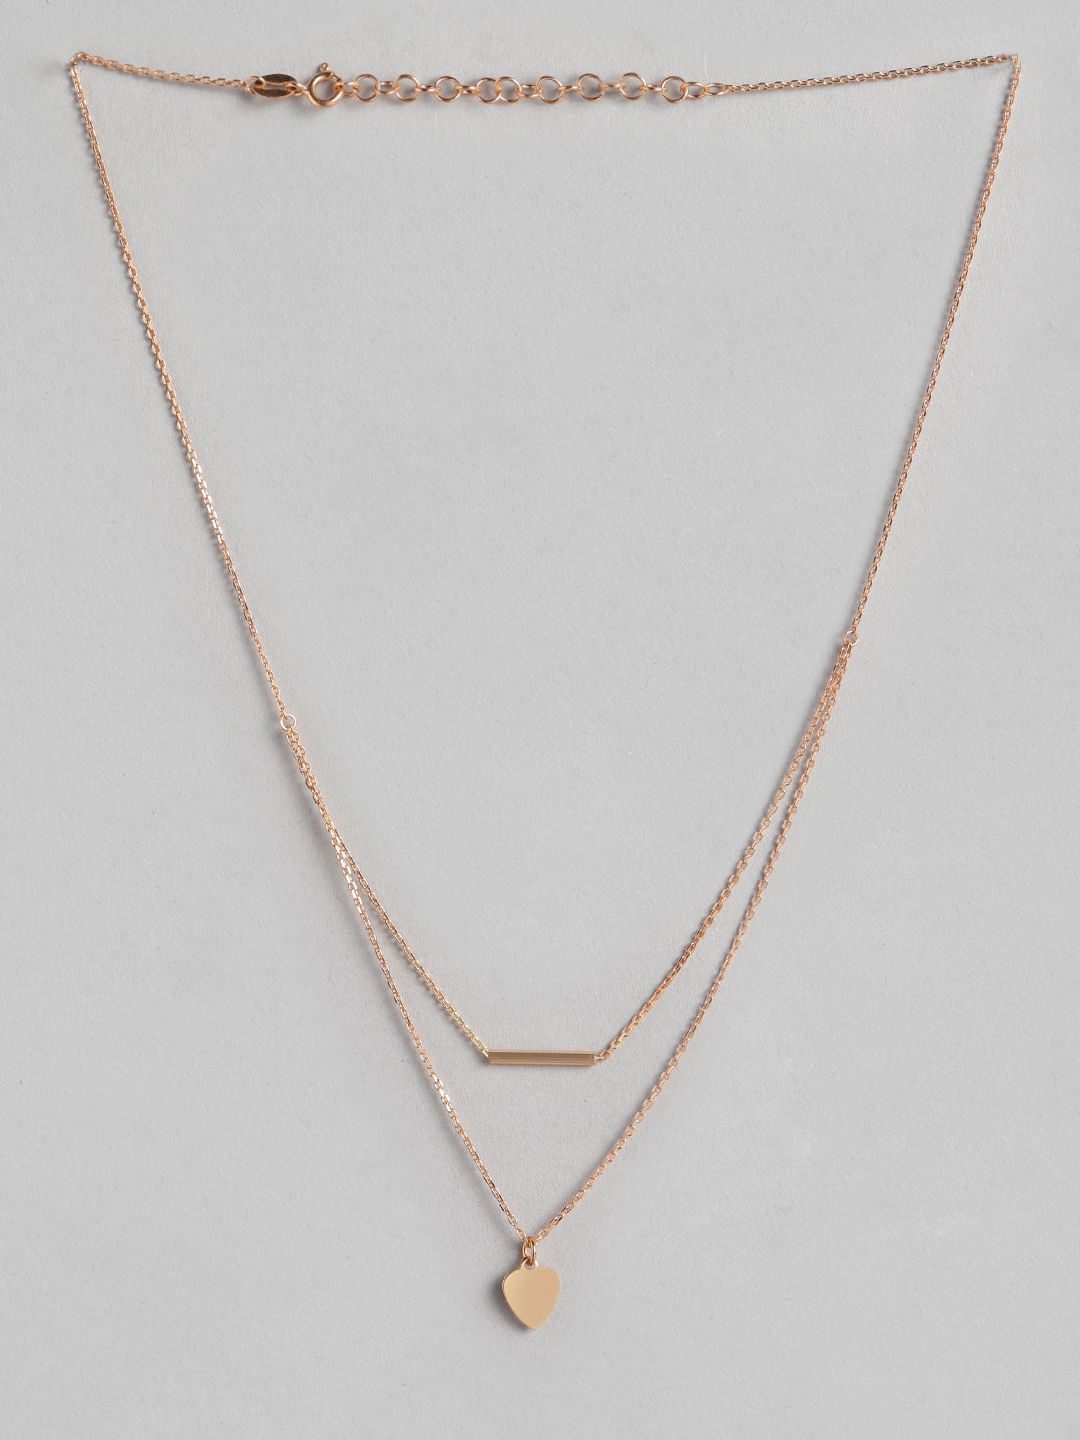 Carlton London Rose Gold-Plated Brass Layered Necklace Price in India